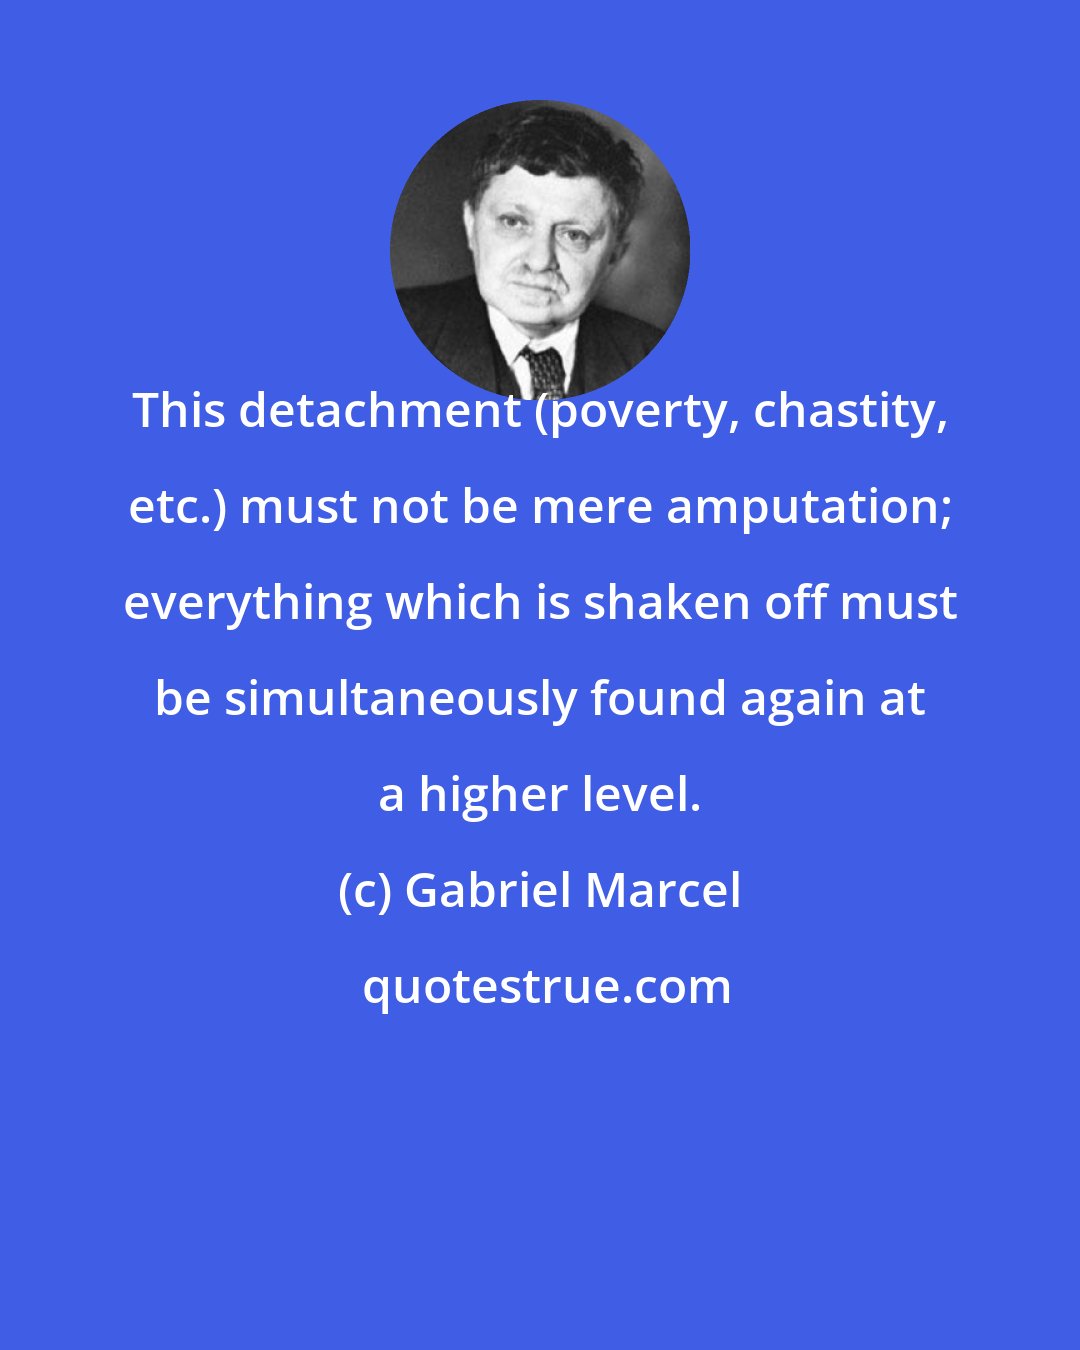 Gabriel Marcel: This detachment (poverty, chastity, etc.) must not be mere amputation; everything which is shaken off must be simultaneously found again at a higher level.